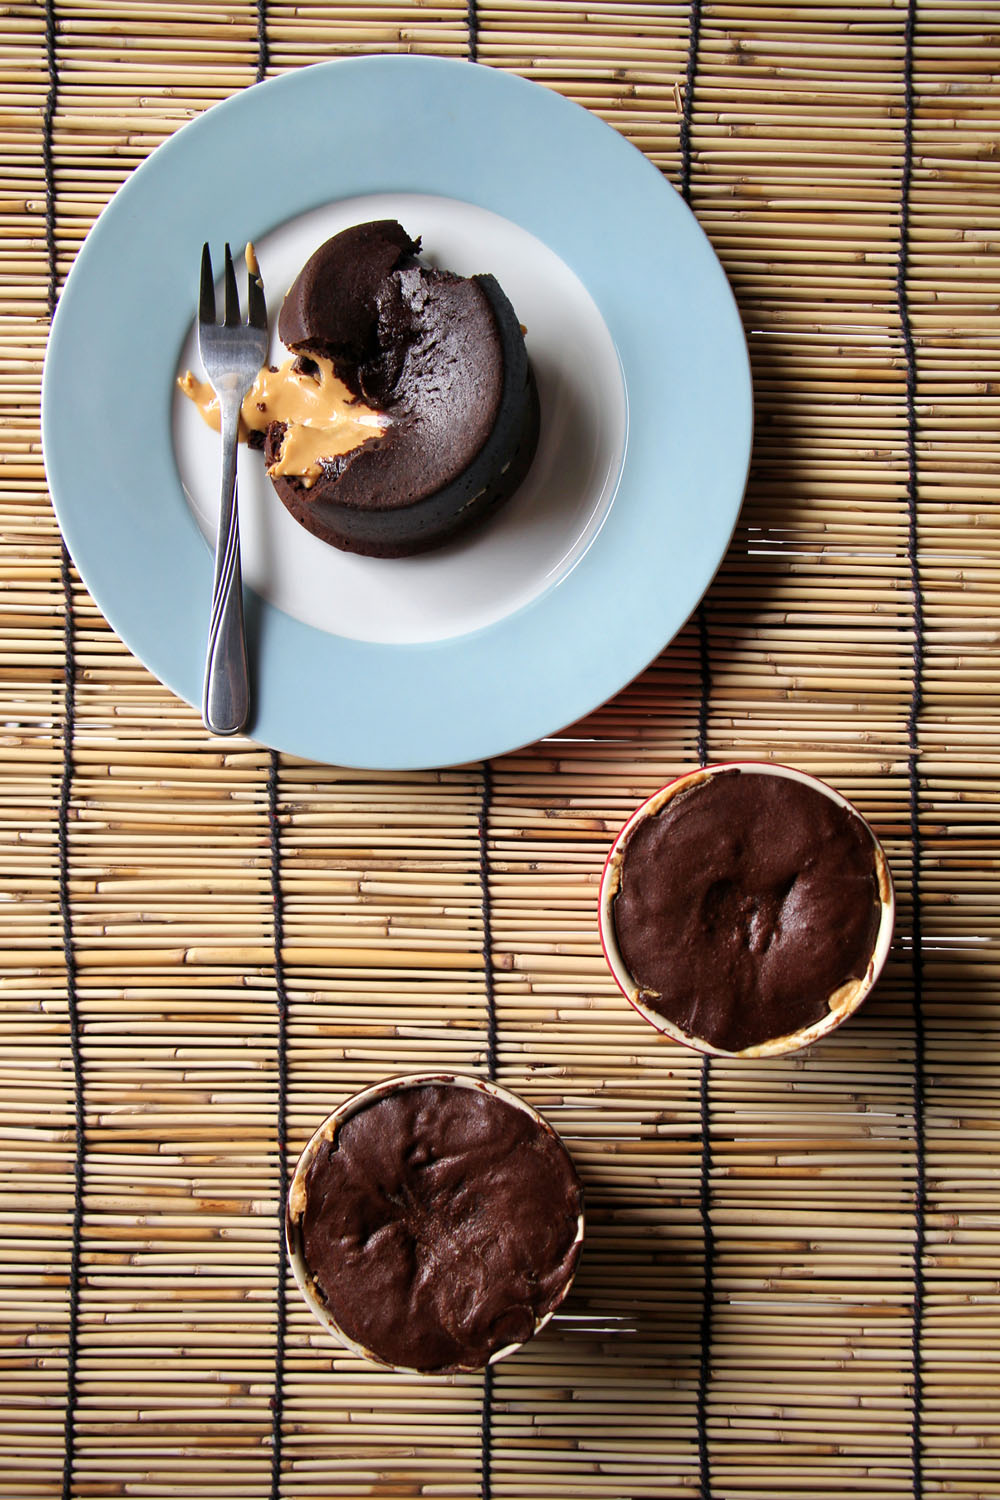 Weekend Kitchen: Molten Peanut Butter and Chocolate Cakes